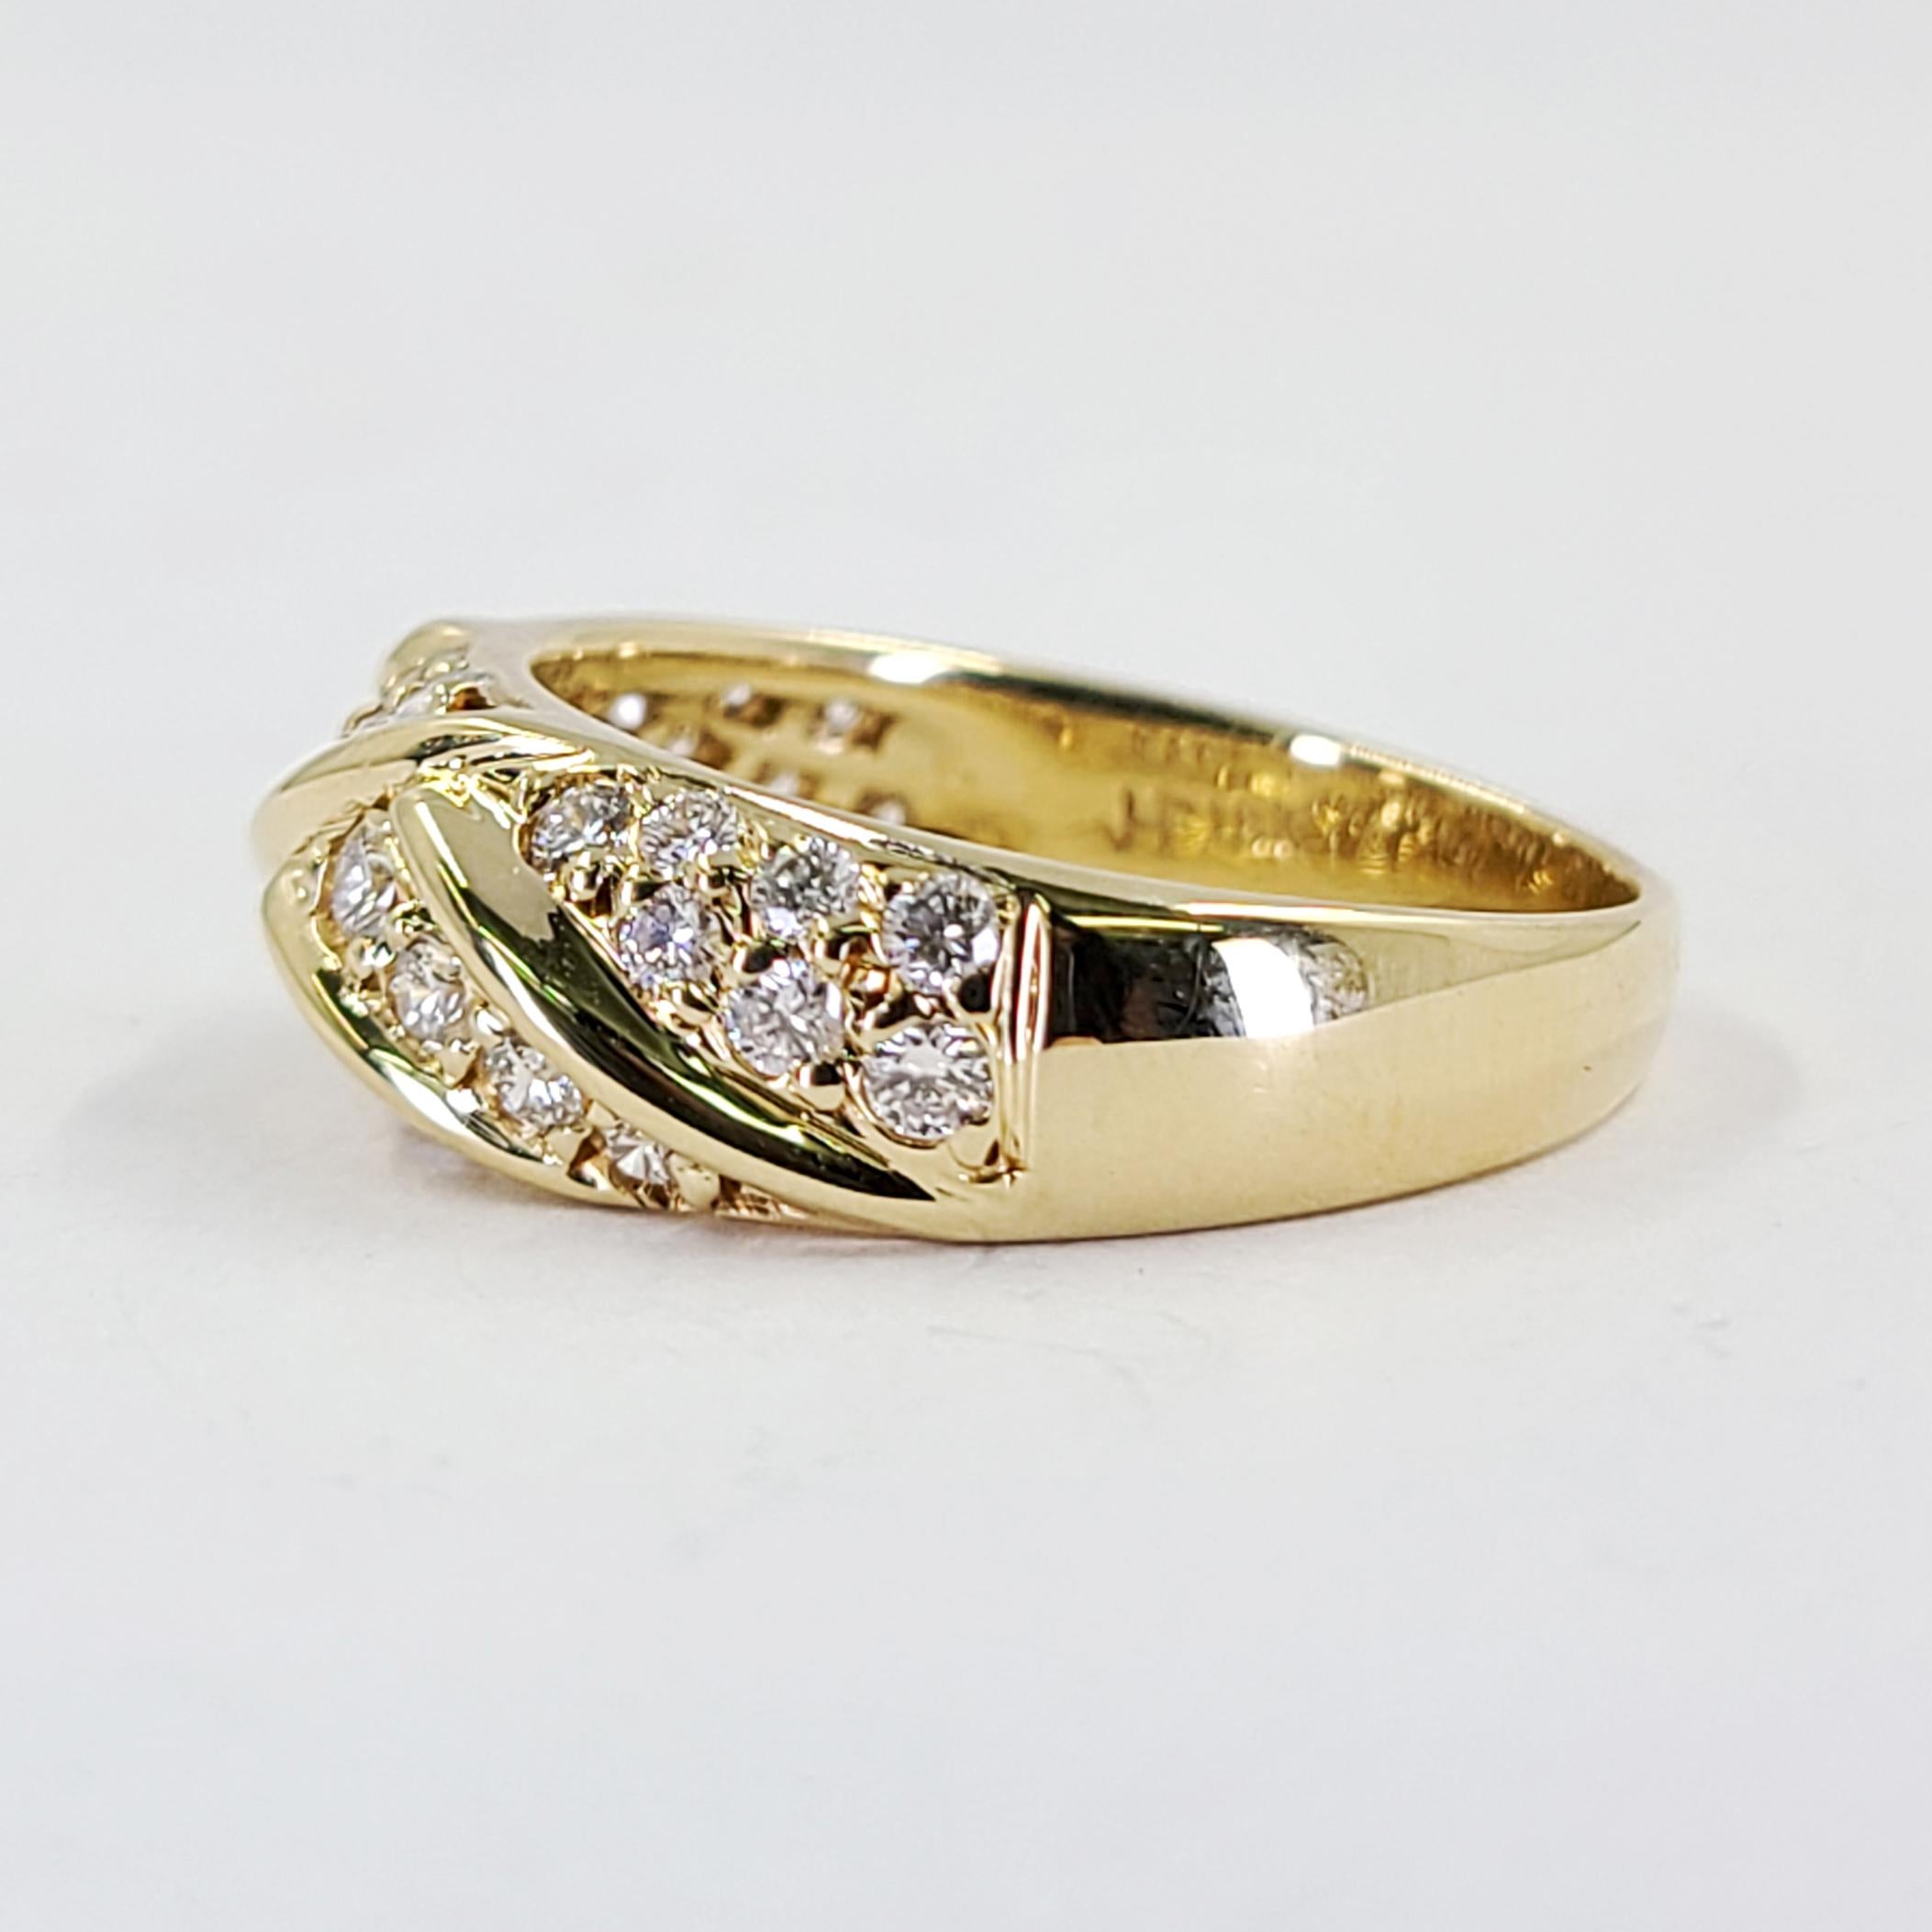 Mayor's 18 Karat Yellow Gold Domed Band Featuring 32 Round Brilliant Cut Diamonds Of VS Clarity & G/H Color Totaling Approximately 1.00 Carat. Finger Size 7; Purchase Includes One Sizing Service. Finished Weight Is 5.2 Grams.